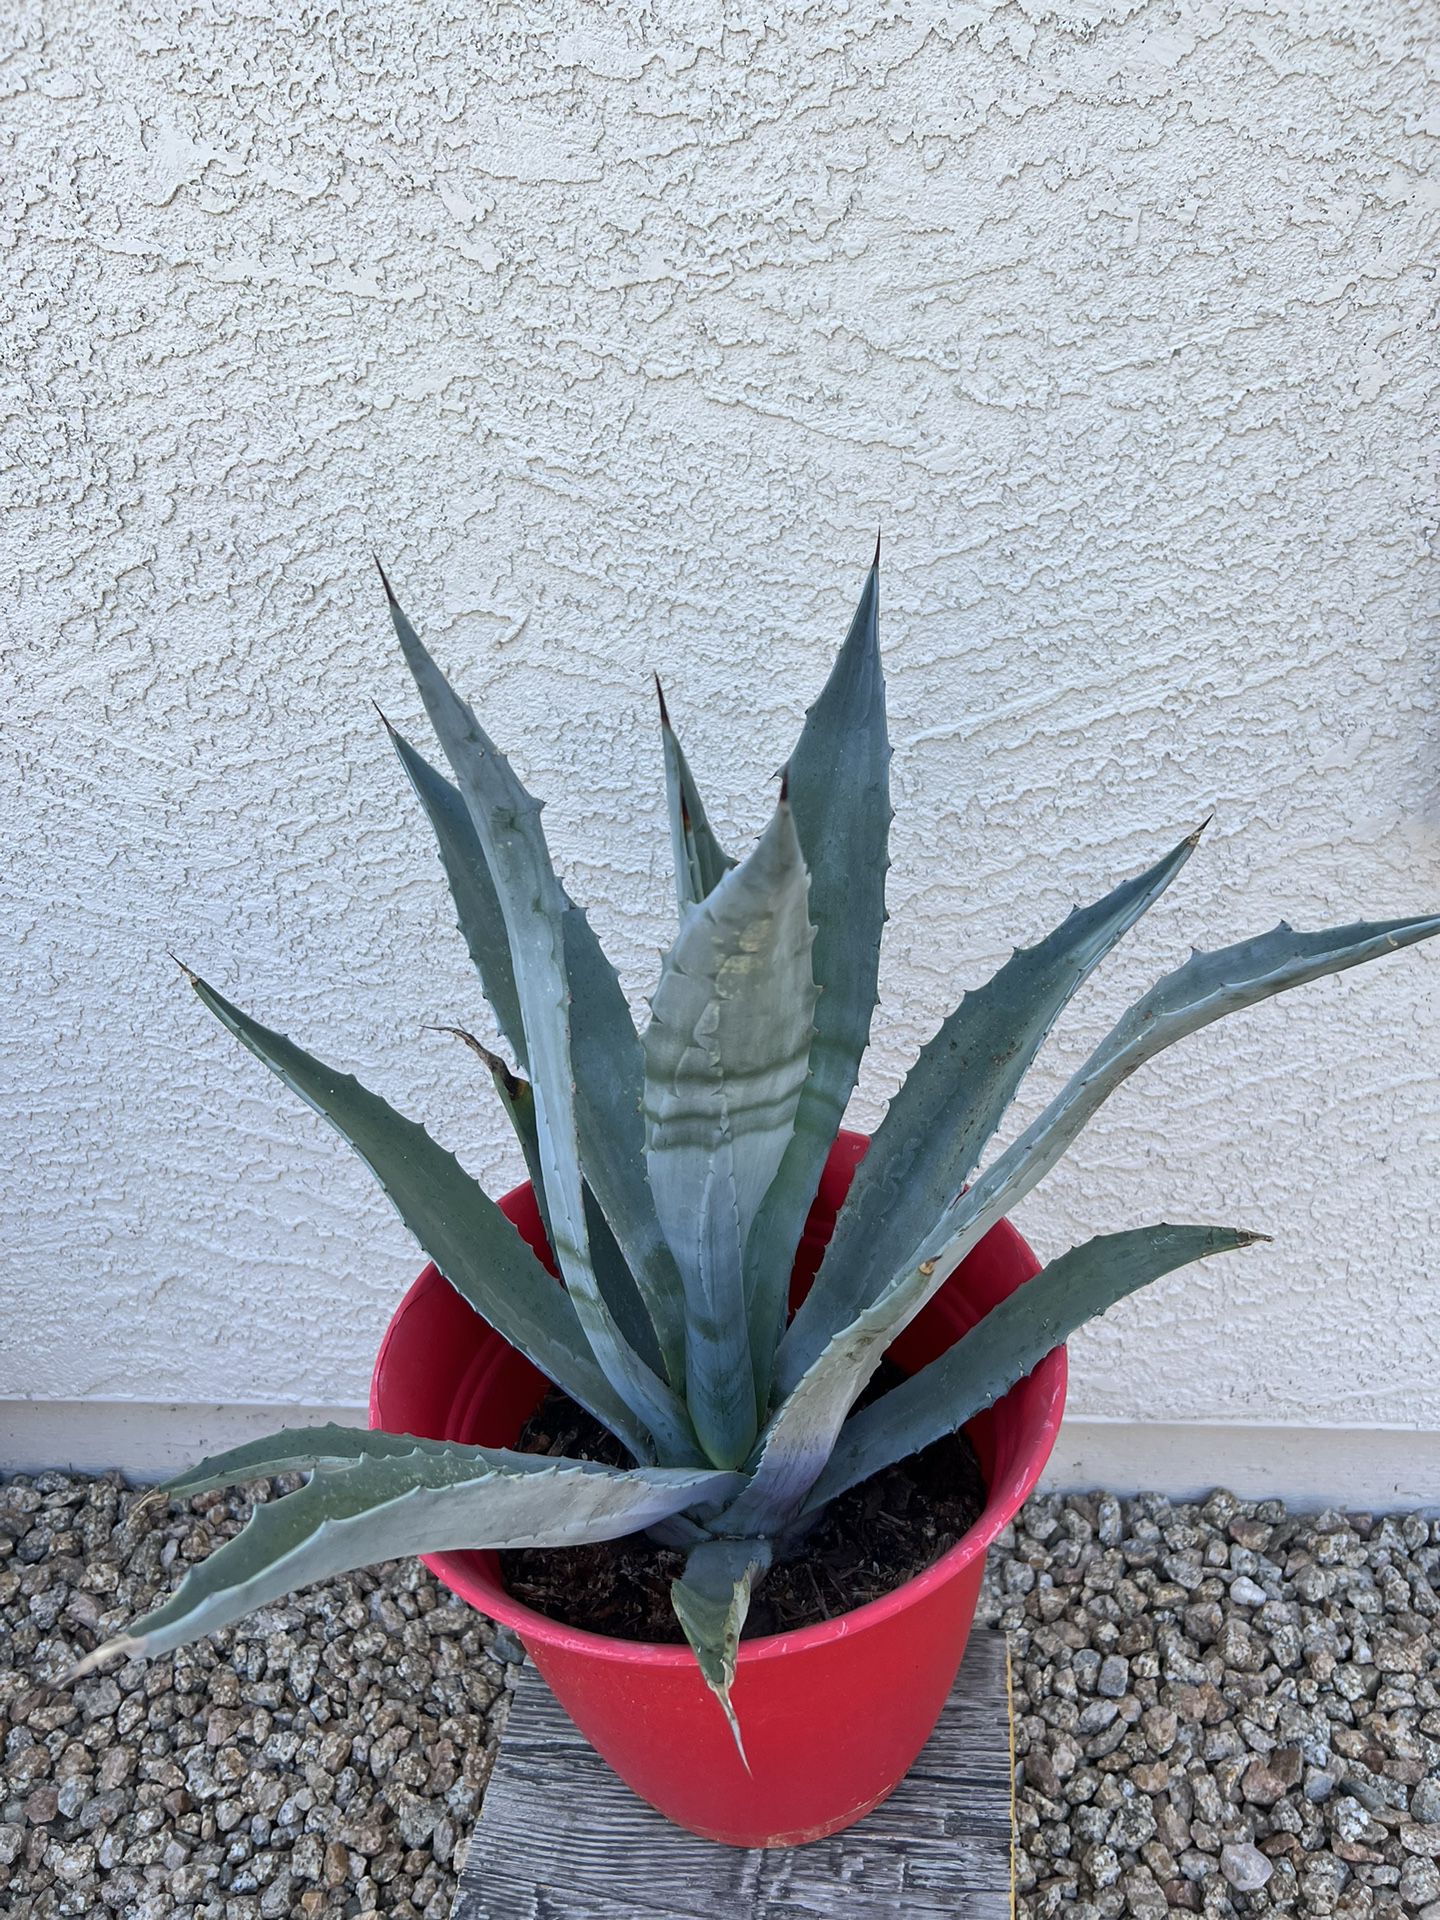 Agave Plant 